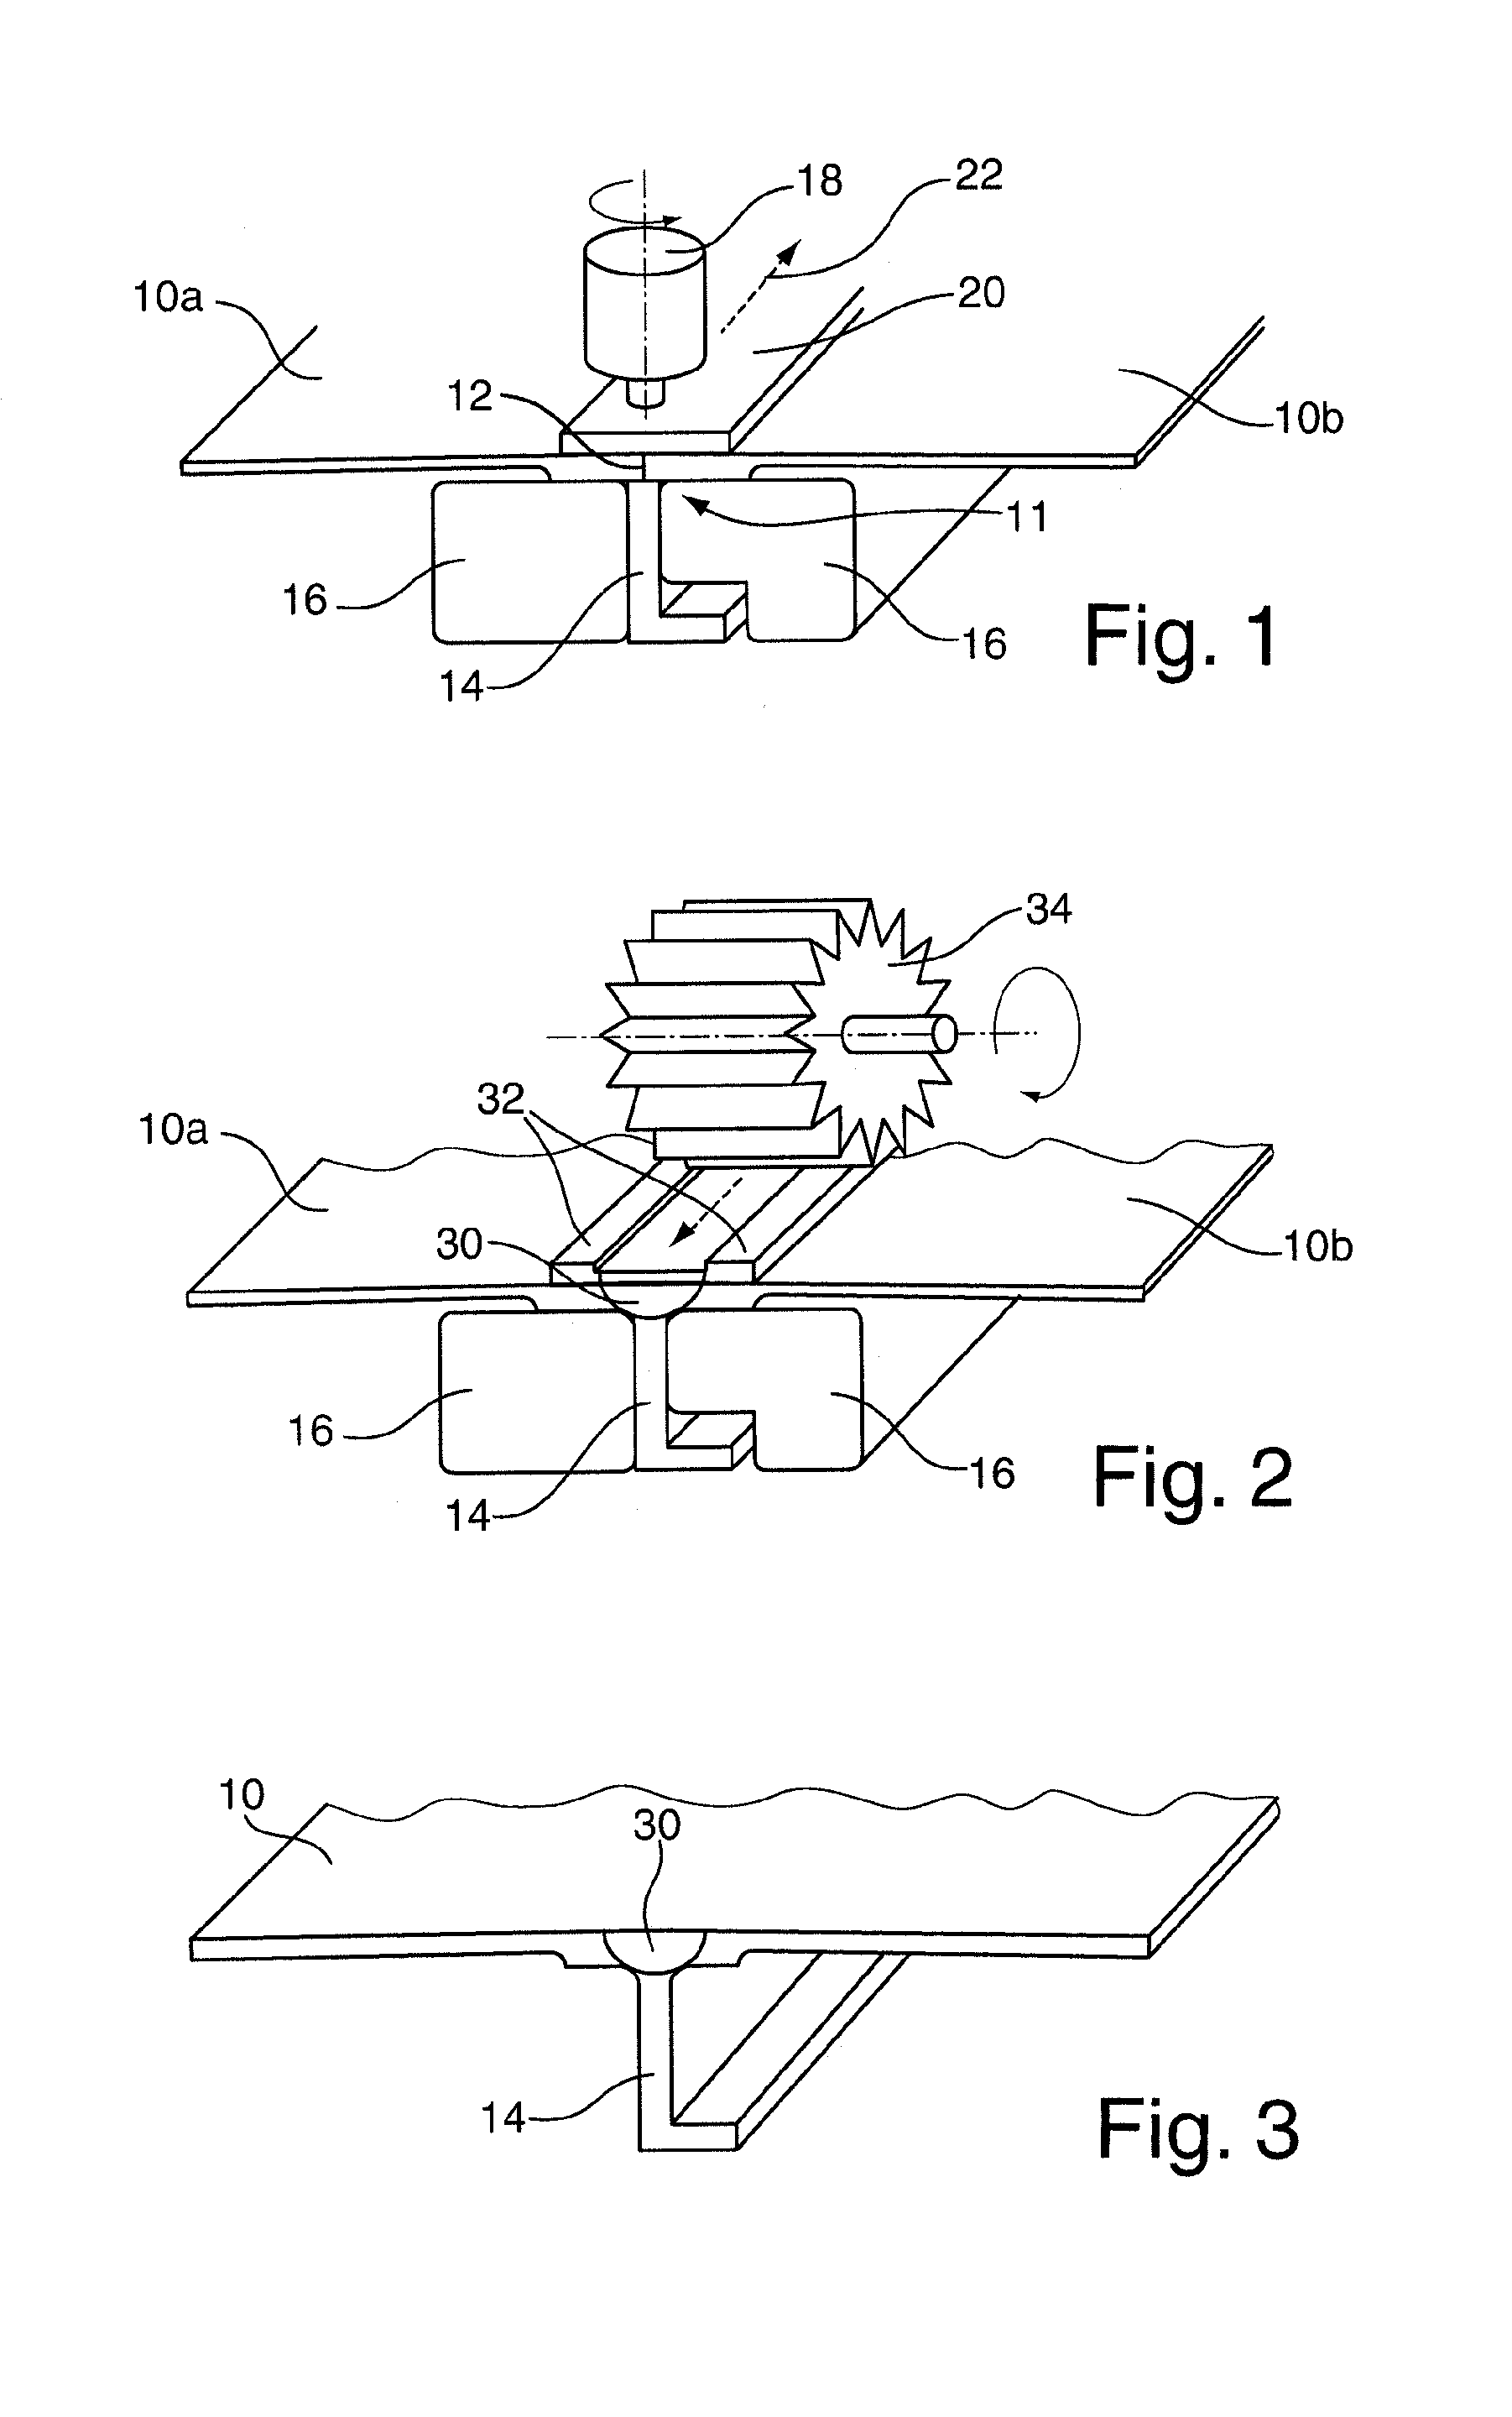 Process for connecting two aircraft fuselage segments by means of friction twist welding